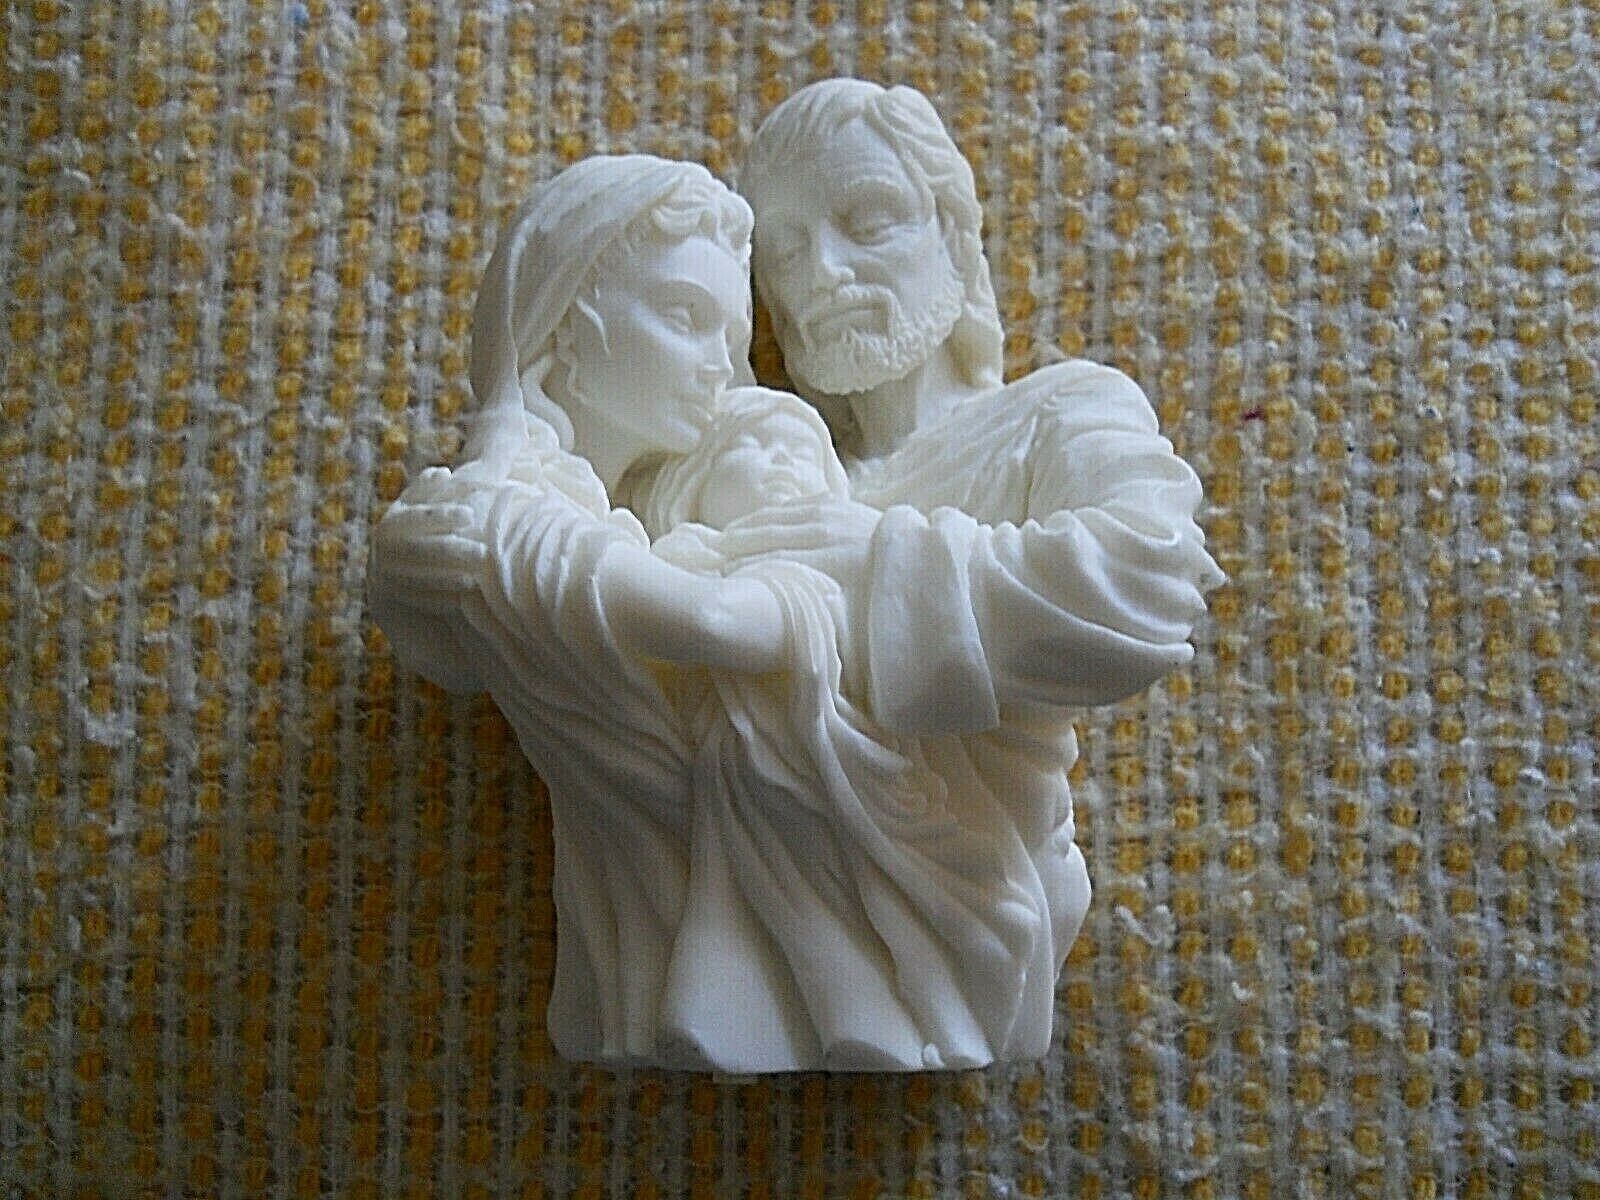 Artist Mark klaus holy family small light-up sculpture from 2007, porcelain